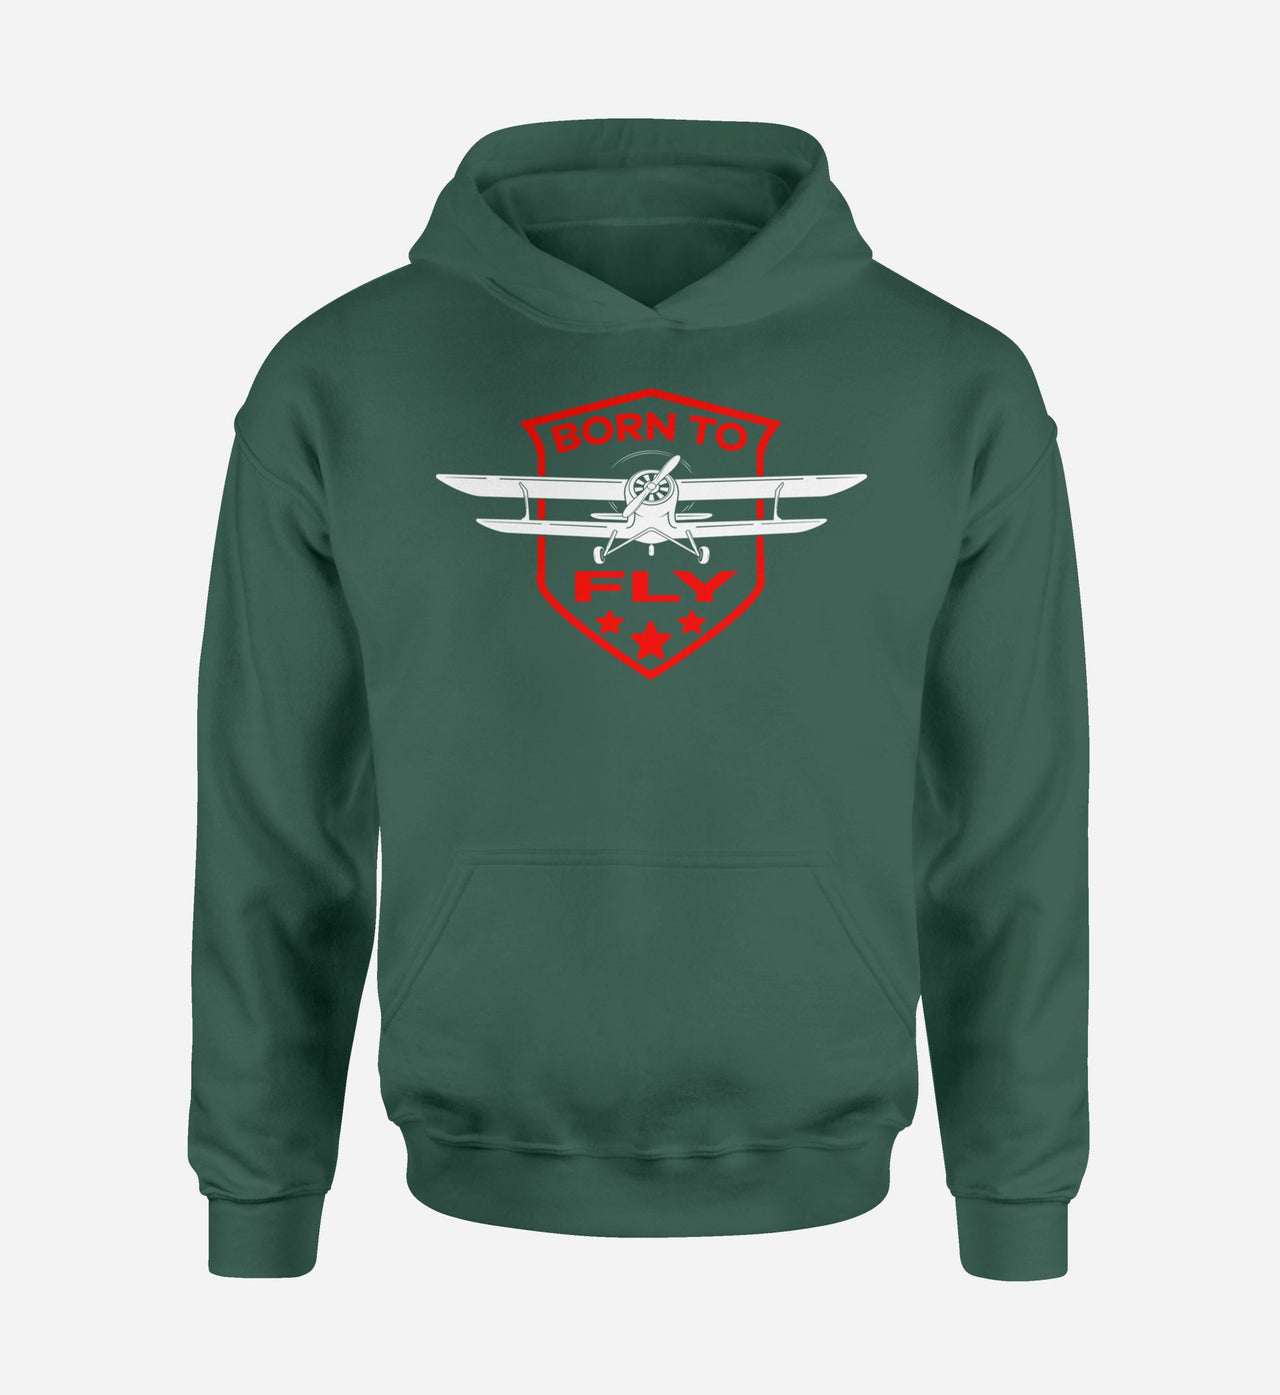 Born To Fly Designed Designed Hoodies